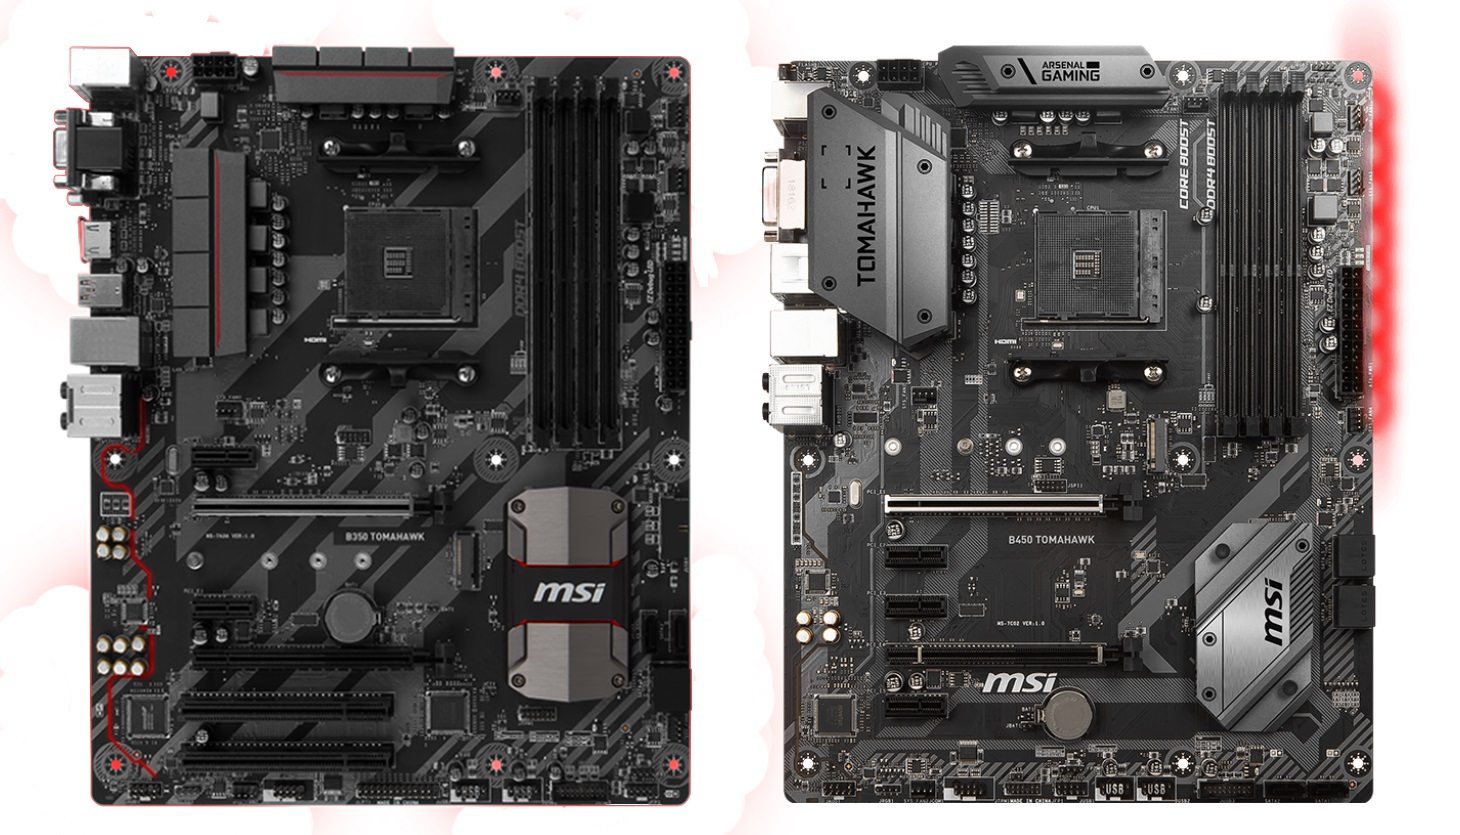 The MSI B450 Tomahawk Motherboard Review: More Missile